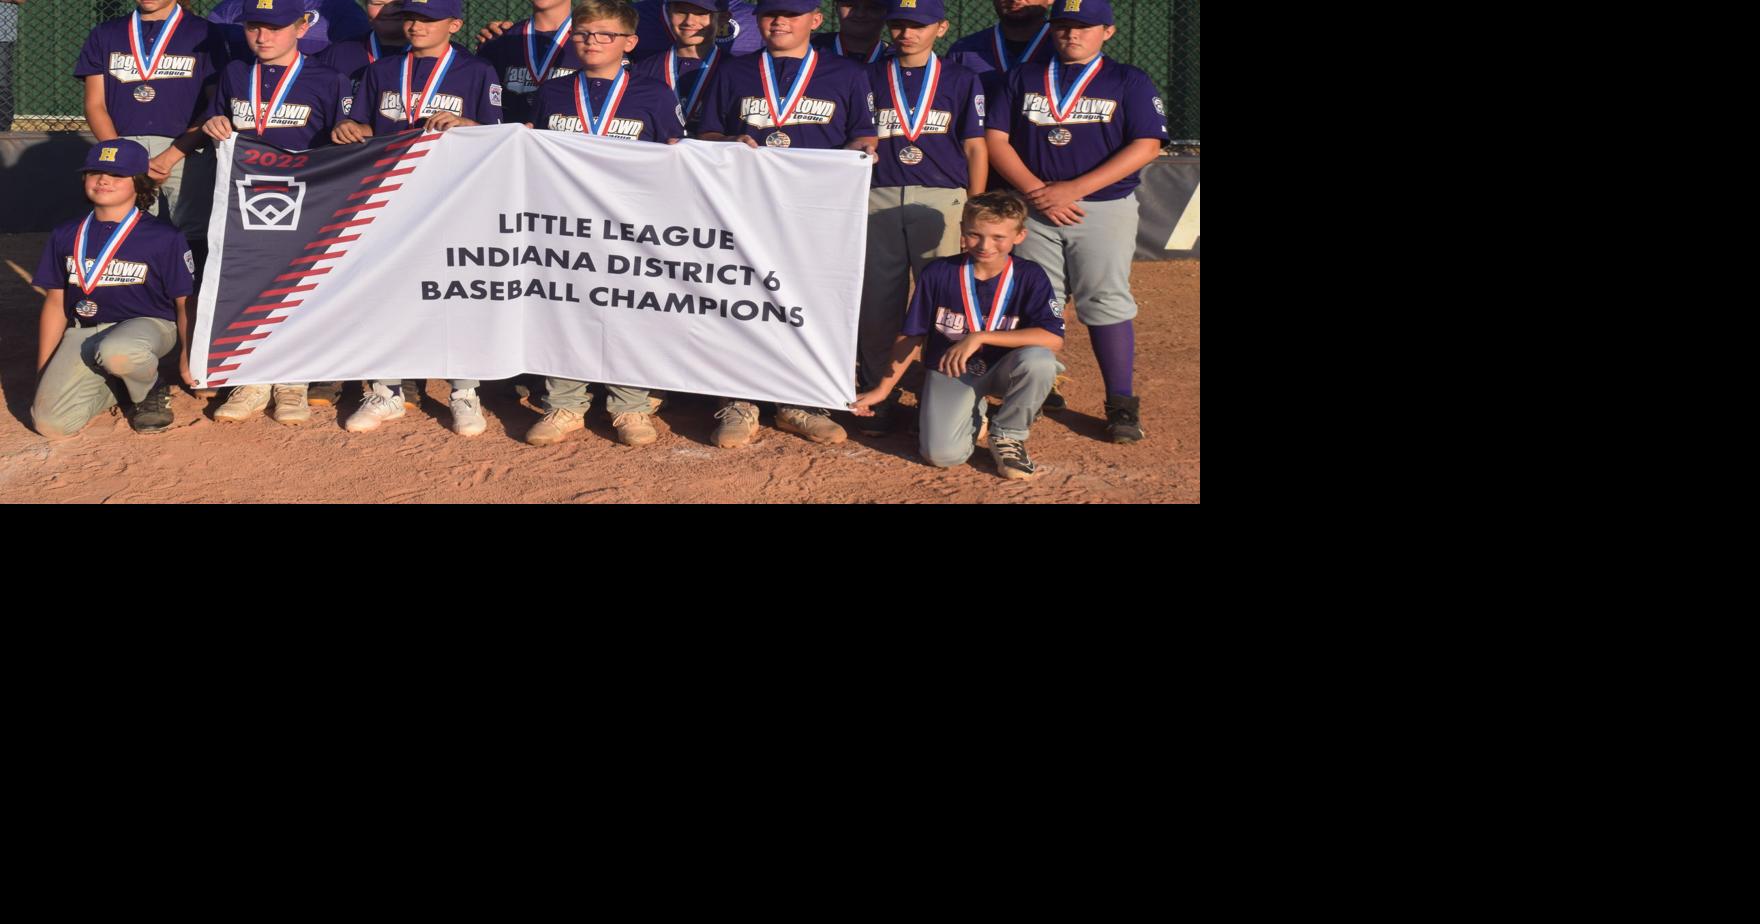 How to watch Little League World Series team from Hagerstown, Indiana